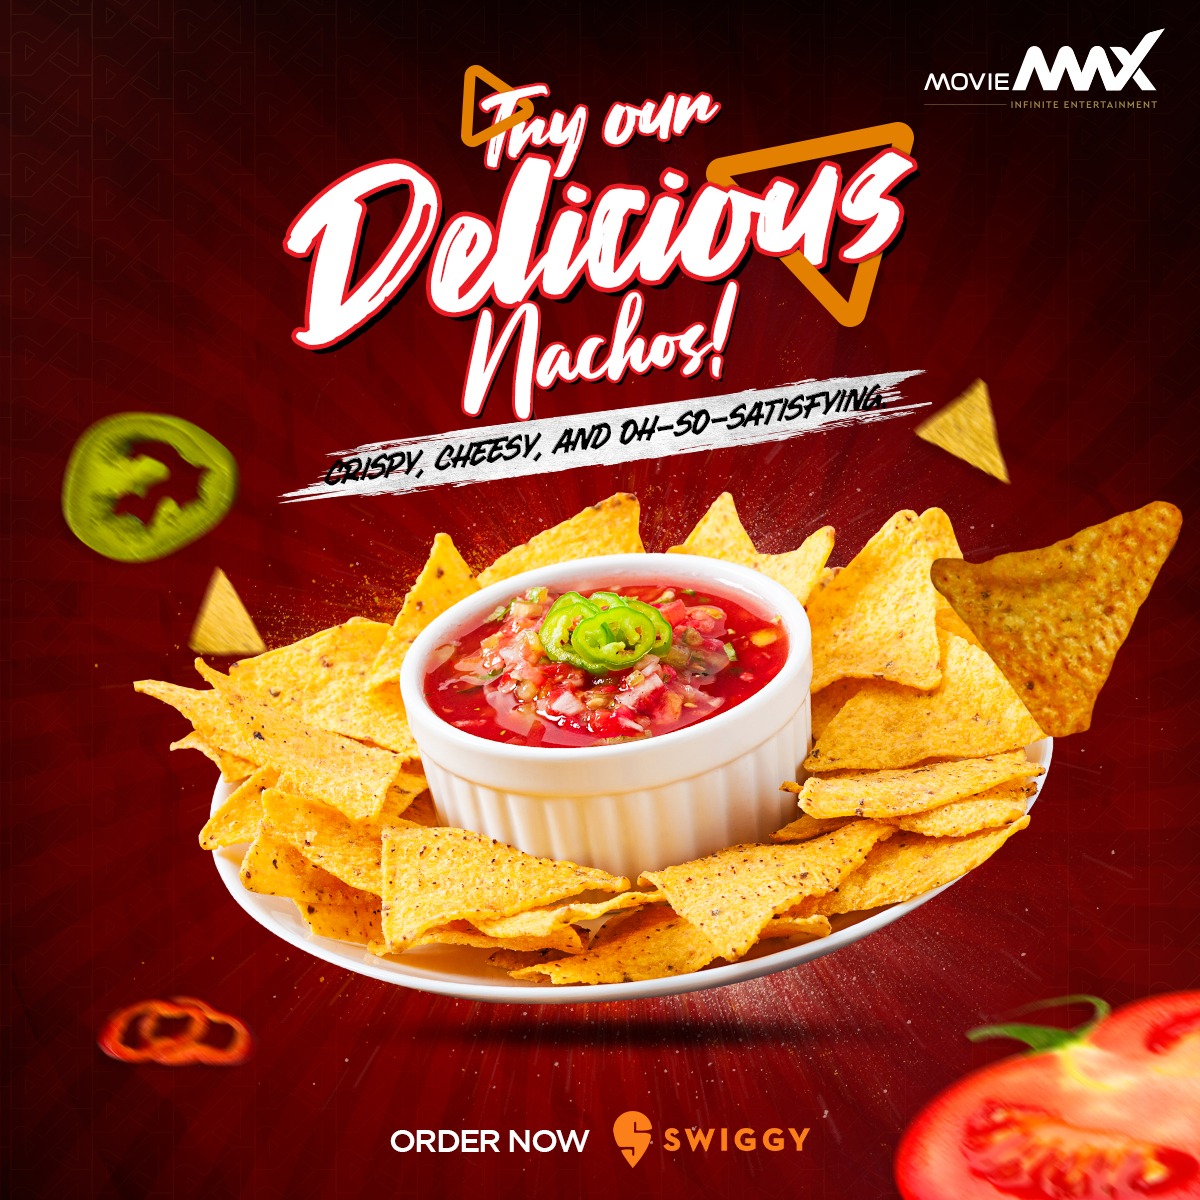 Get ready to take your taste buds on a crispy, cheesy, and an adventurous ride at #MovieMax! 🧀✨ Dive into a mountain of delicious nachos 🌮 that'll make every crunch count.

Order now on Swiggy and treat yourself to a tasty brunch!

#MovieMaxNachos #MovieMaxFood